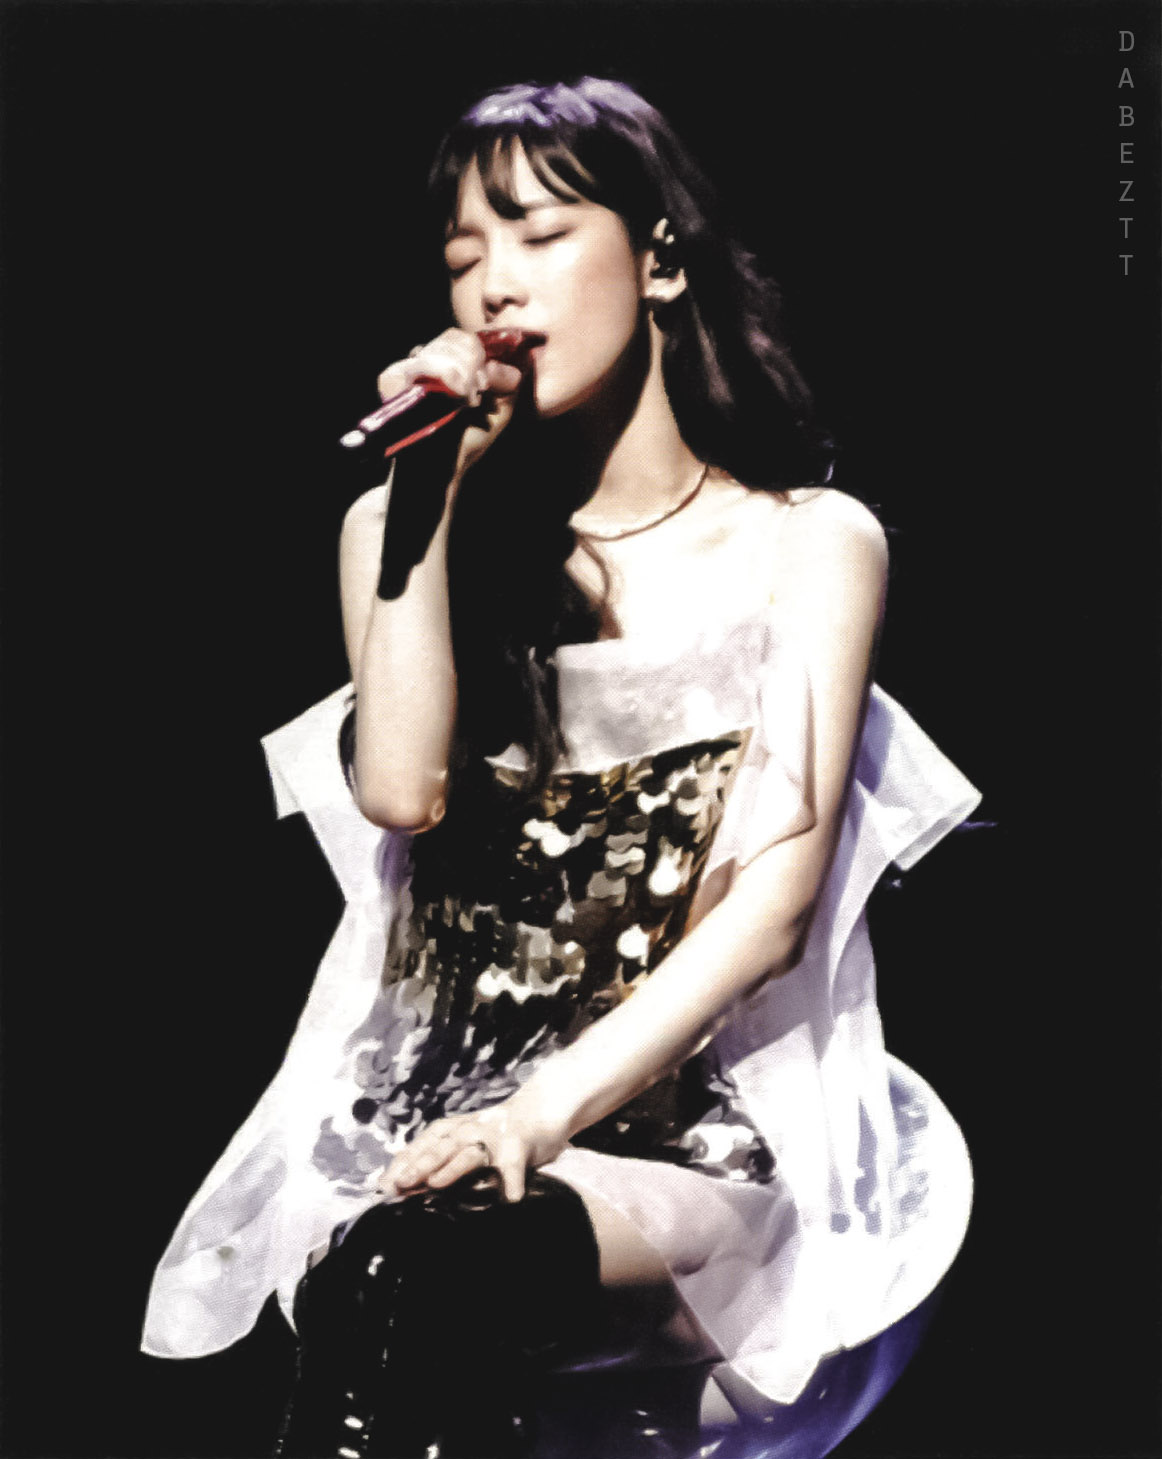 180323 TAEYEON SPECIAL LIVE “The Magic of Christmas Time” DVD 스캔 by Dabeztt (30).jpg